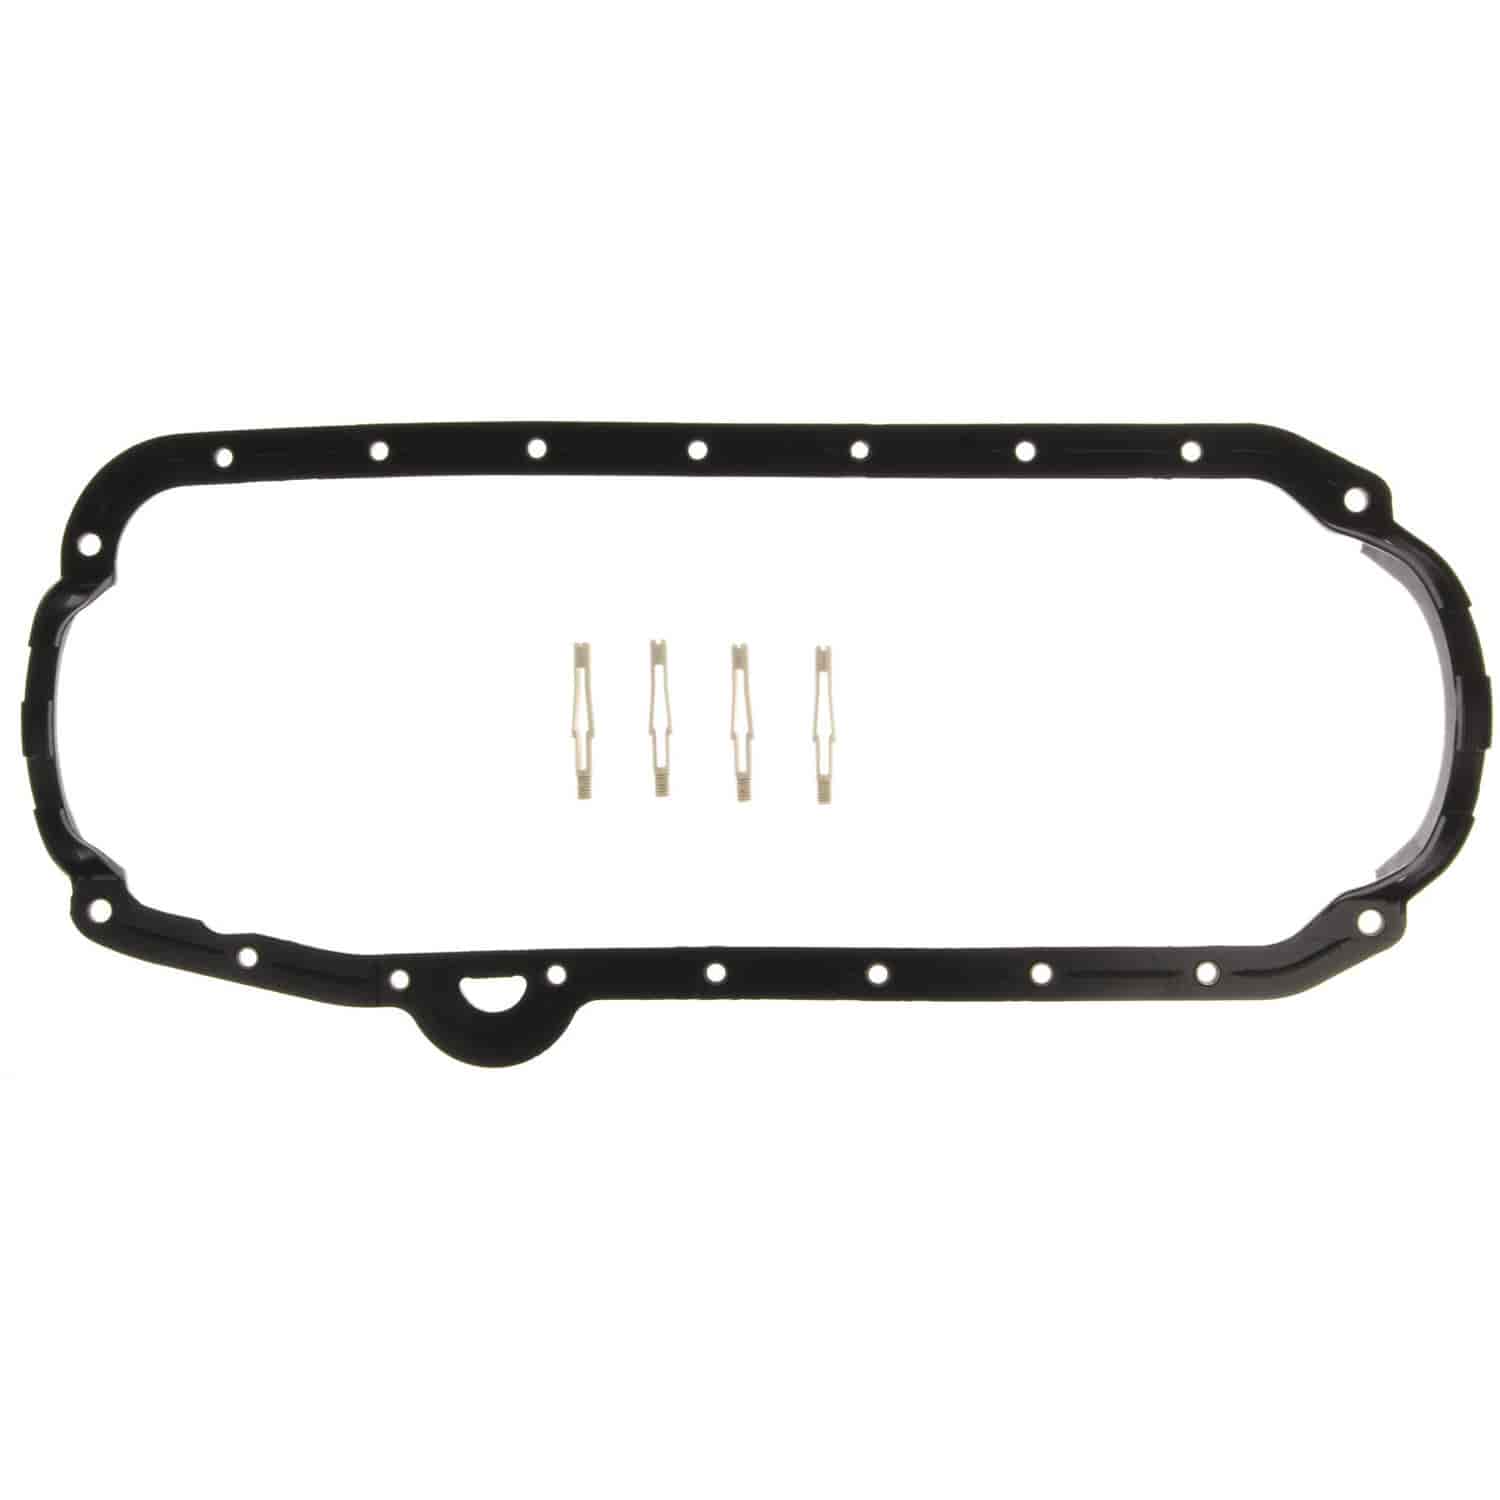 Oil Pan Gasket Set 1970-1980 Small Block Chevy 262/267/305/350/400 with Left Hand Dip Stick